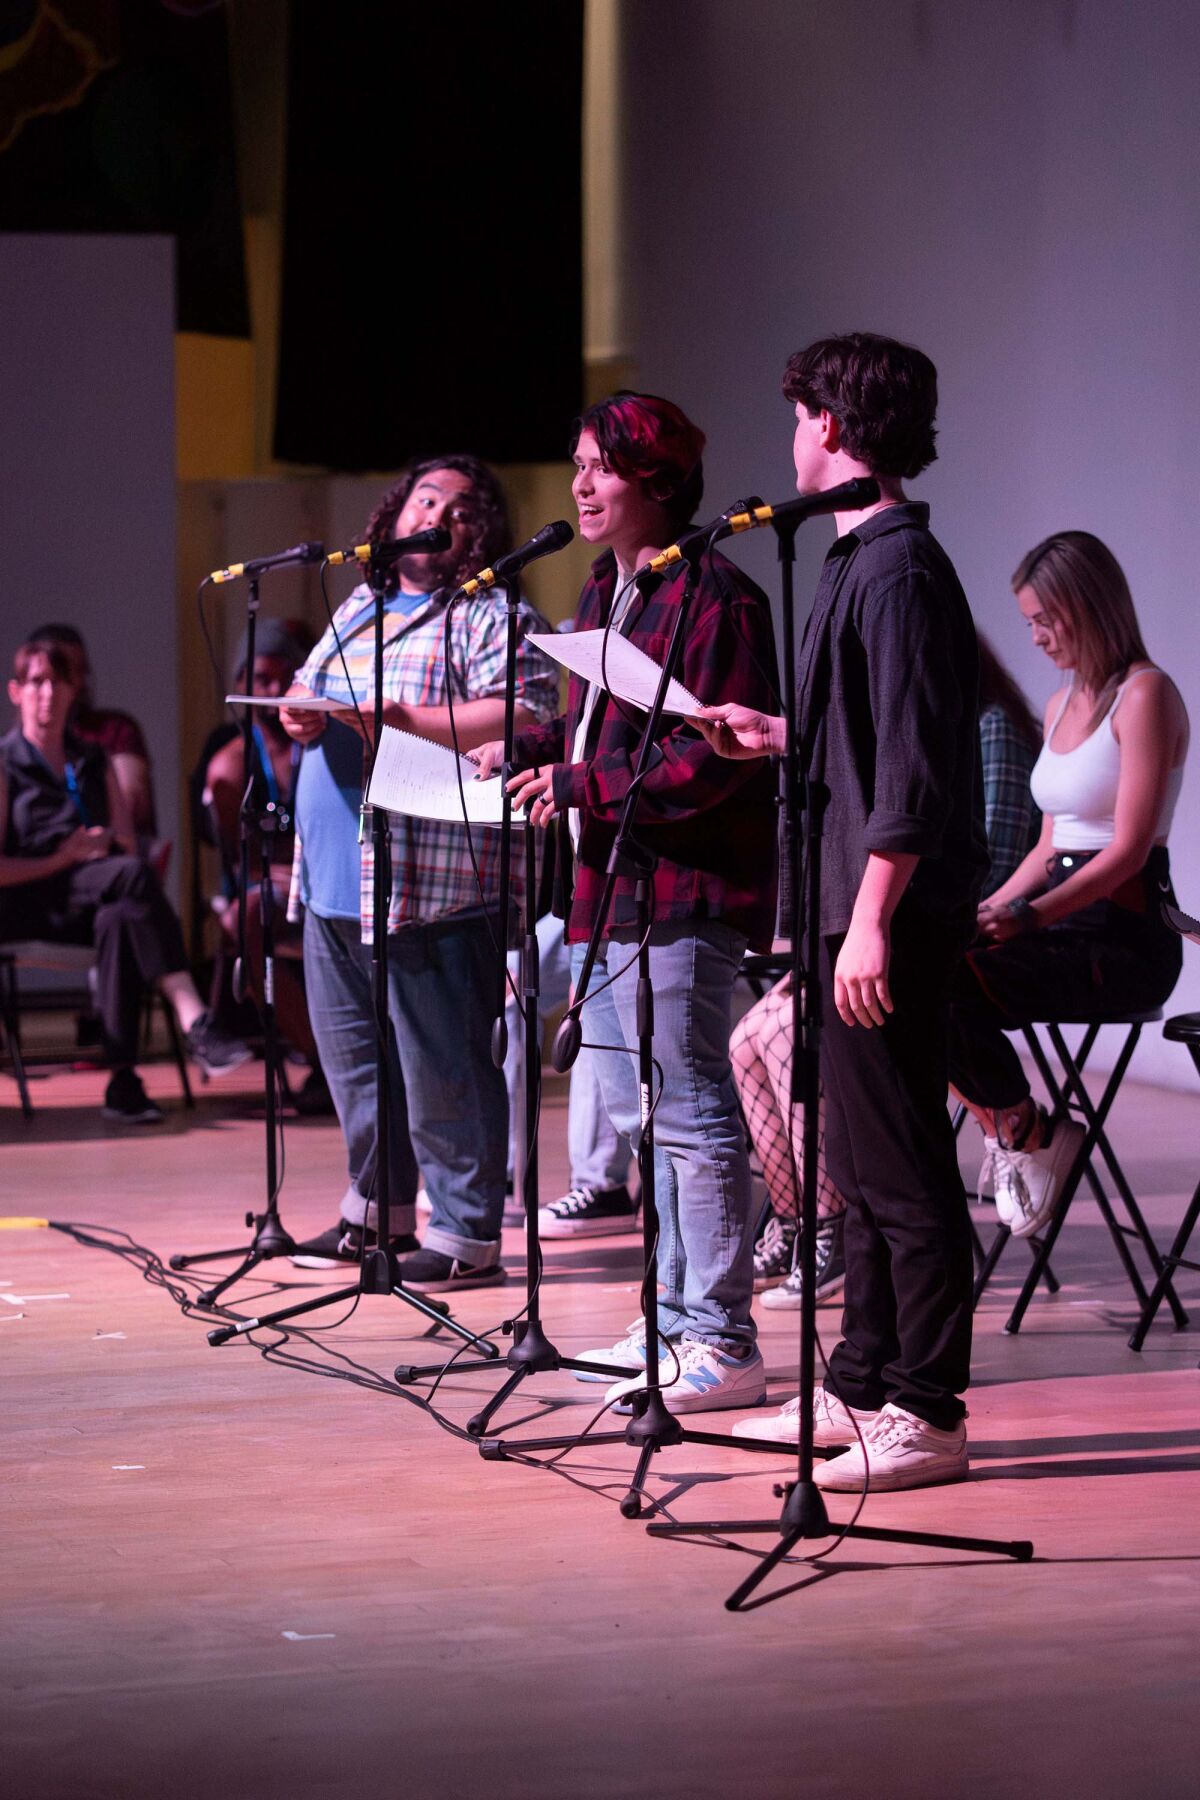 A staged reading of "1996: A blink-182 Musical" at San Diego Fringe festival.